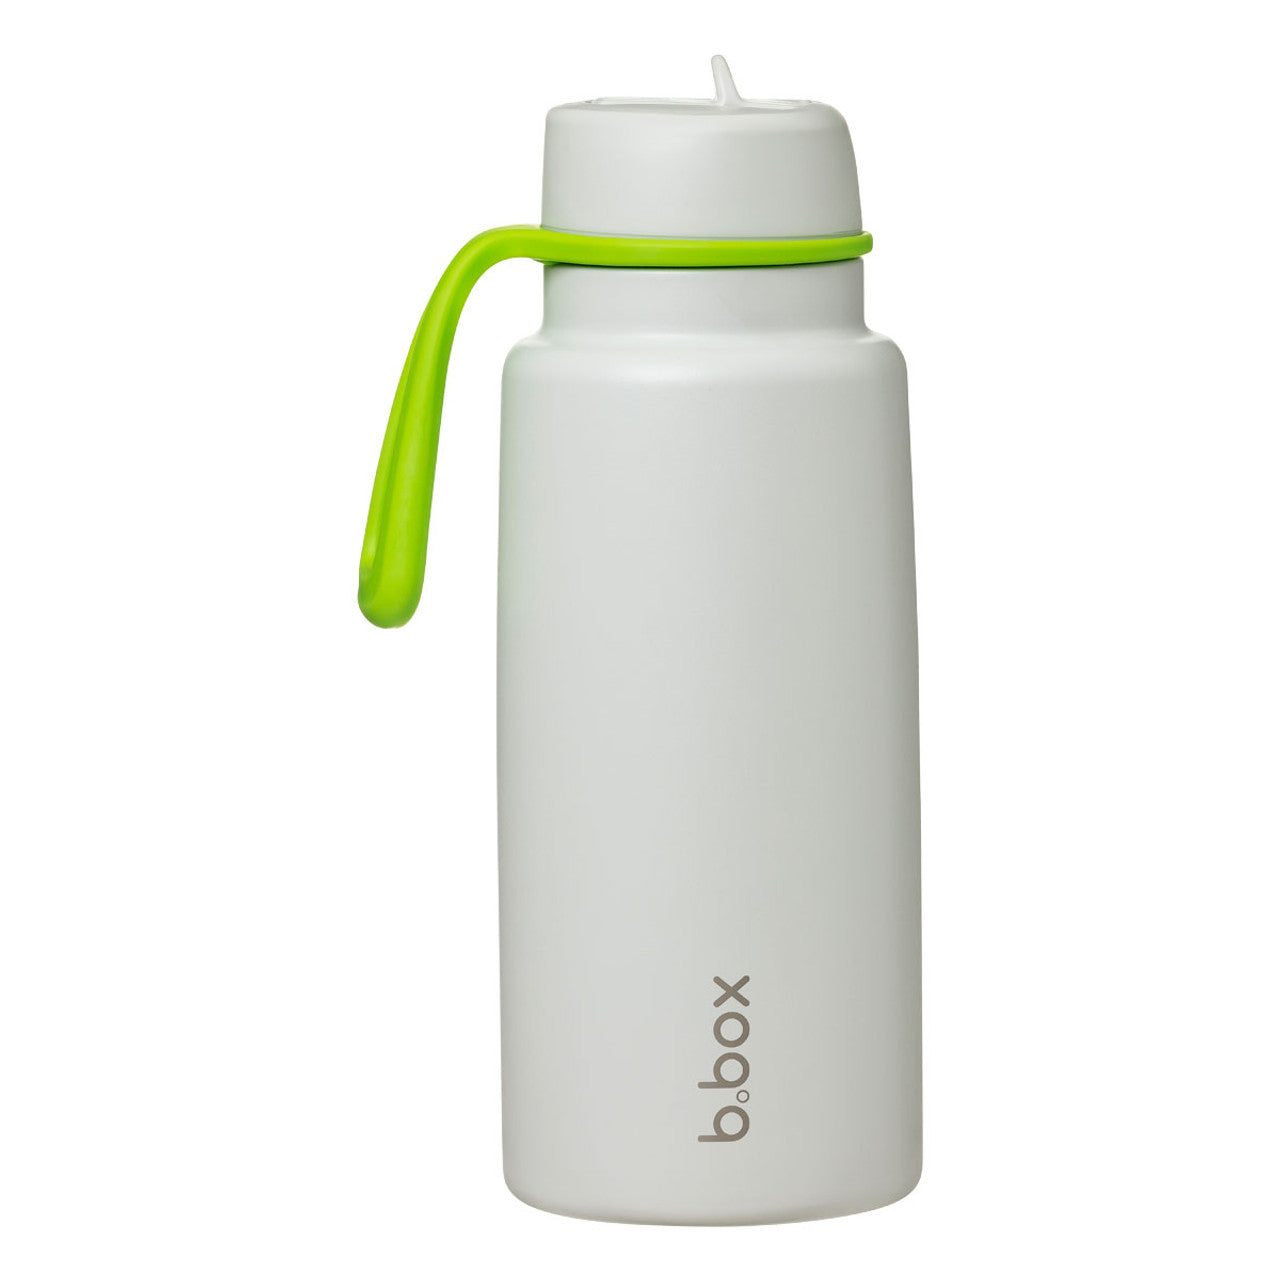 b.box insulated 1 litre drink bottle